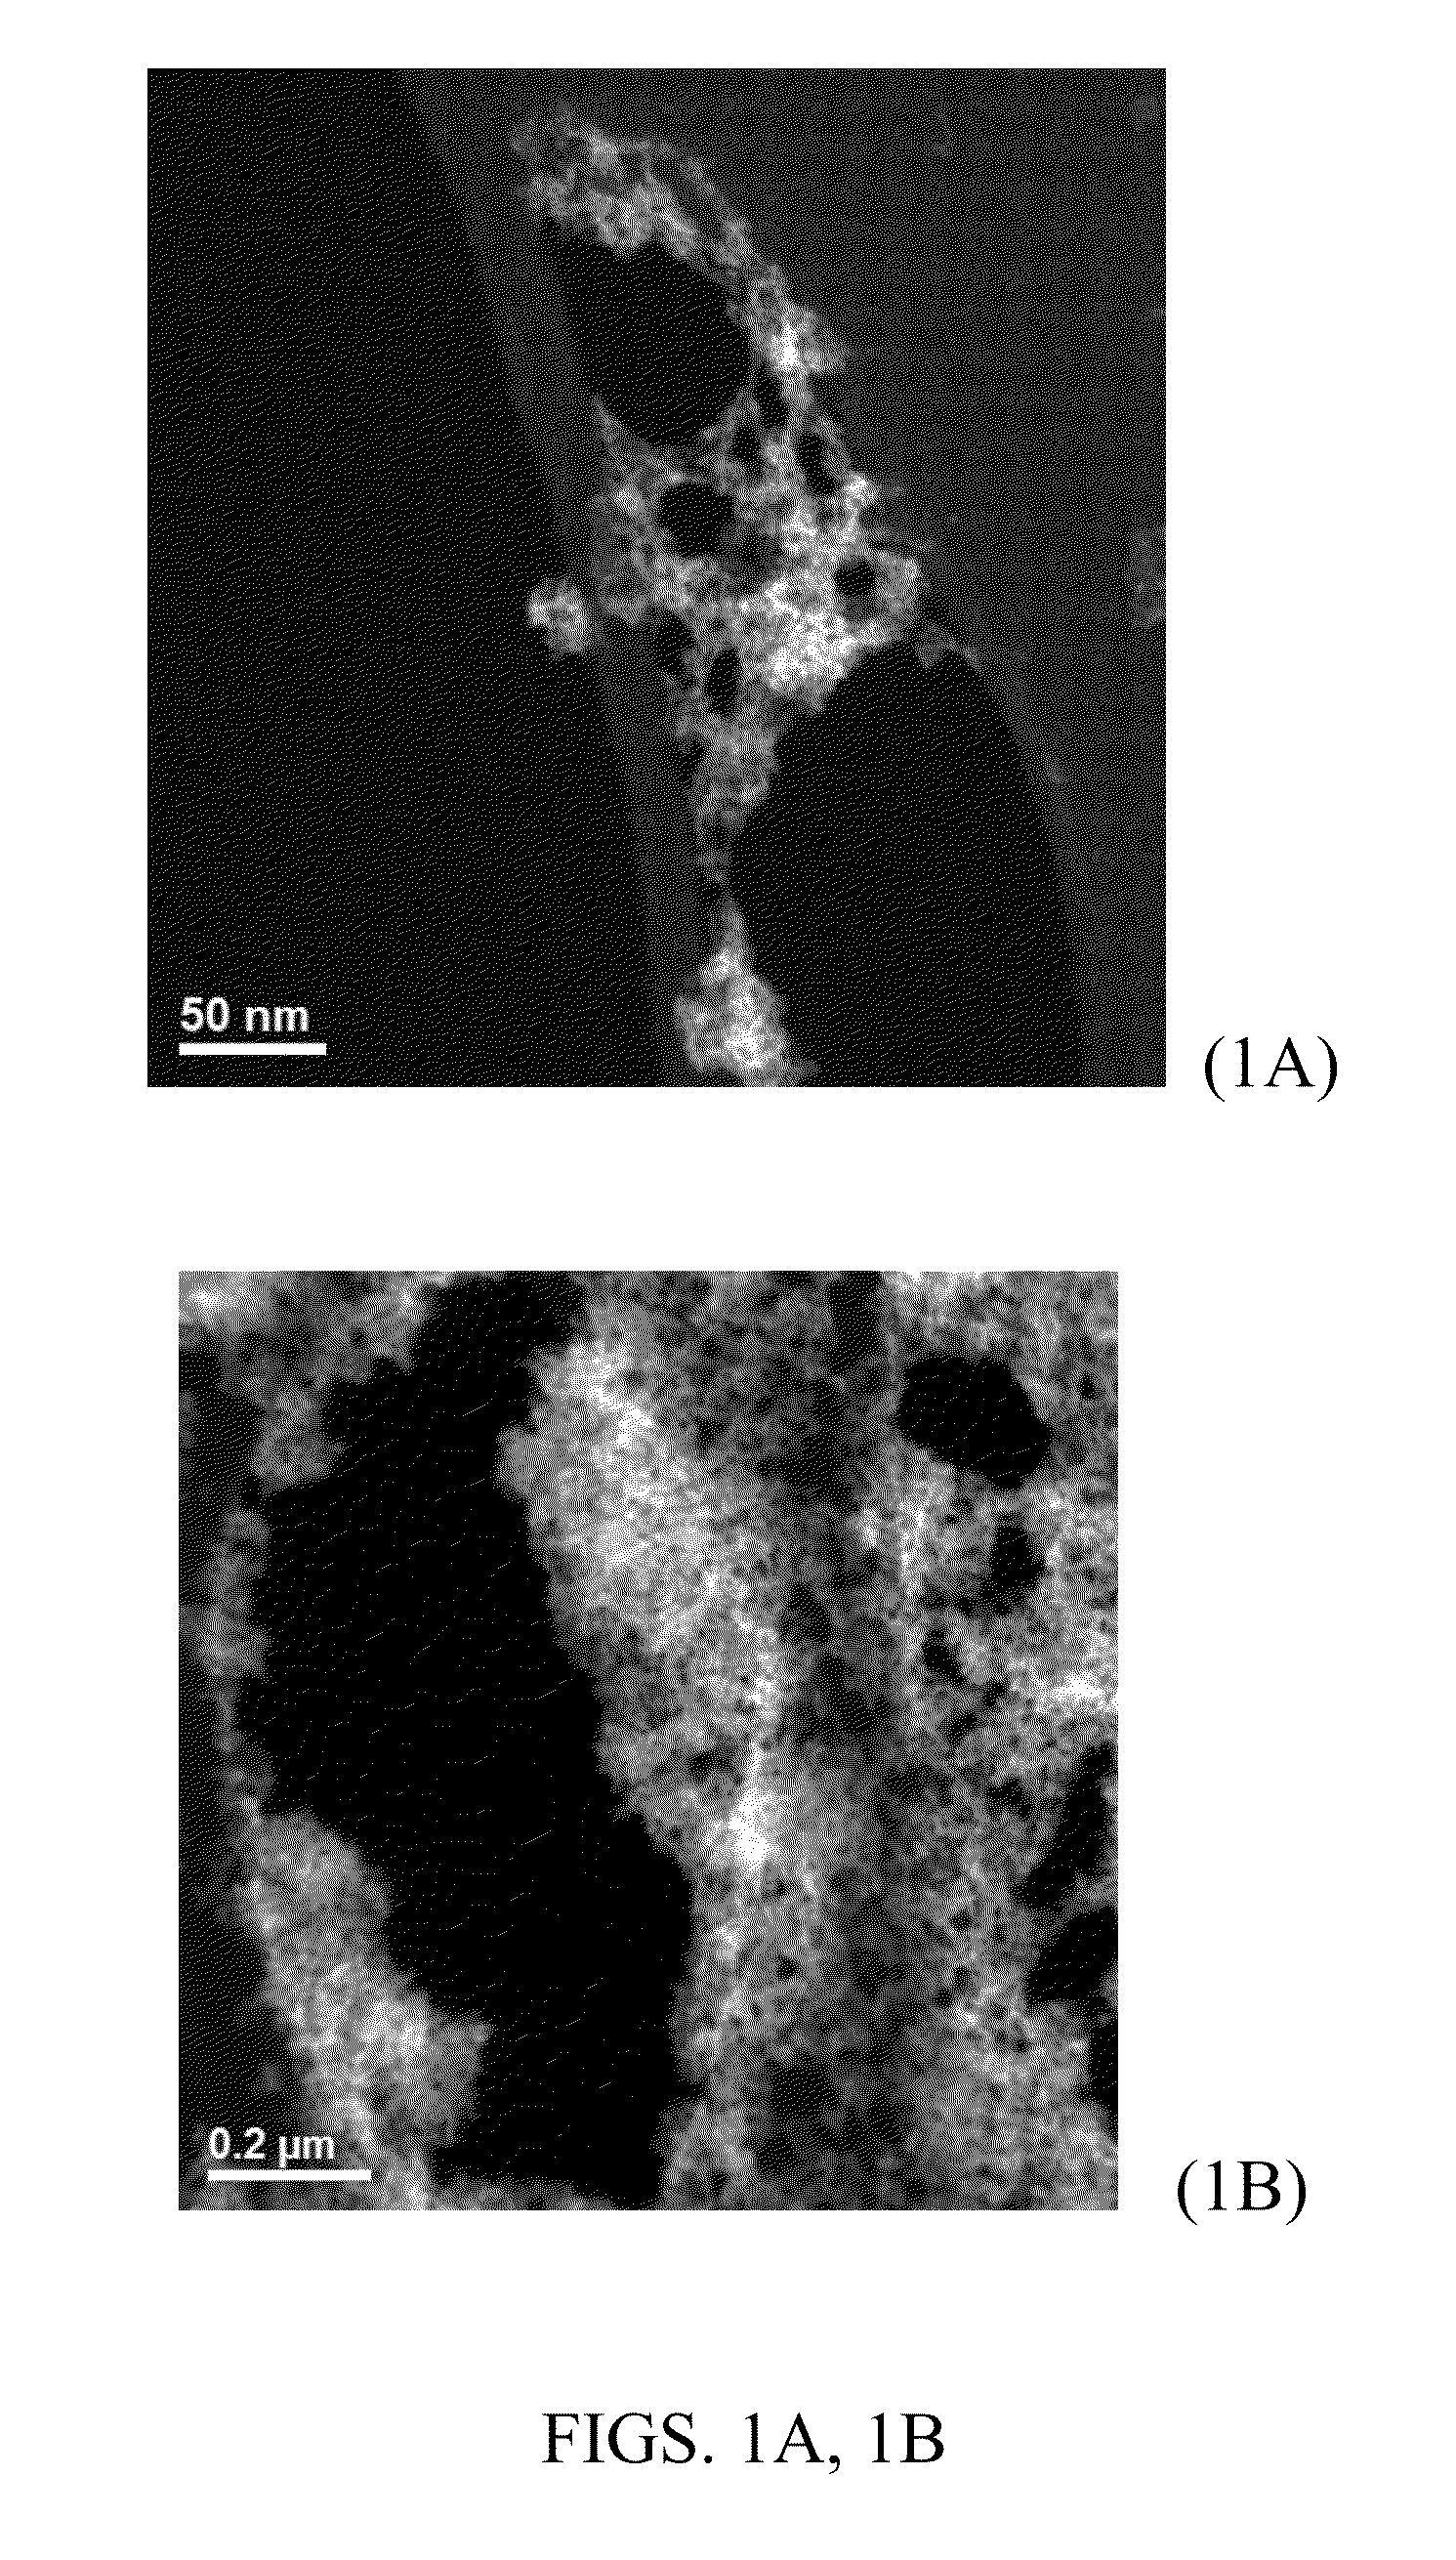 Compositions and methods of use for detection and imaging of prints by surface-enhanced spectroscopic techniques